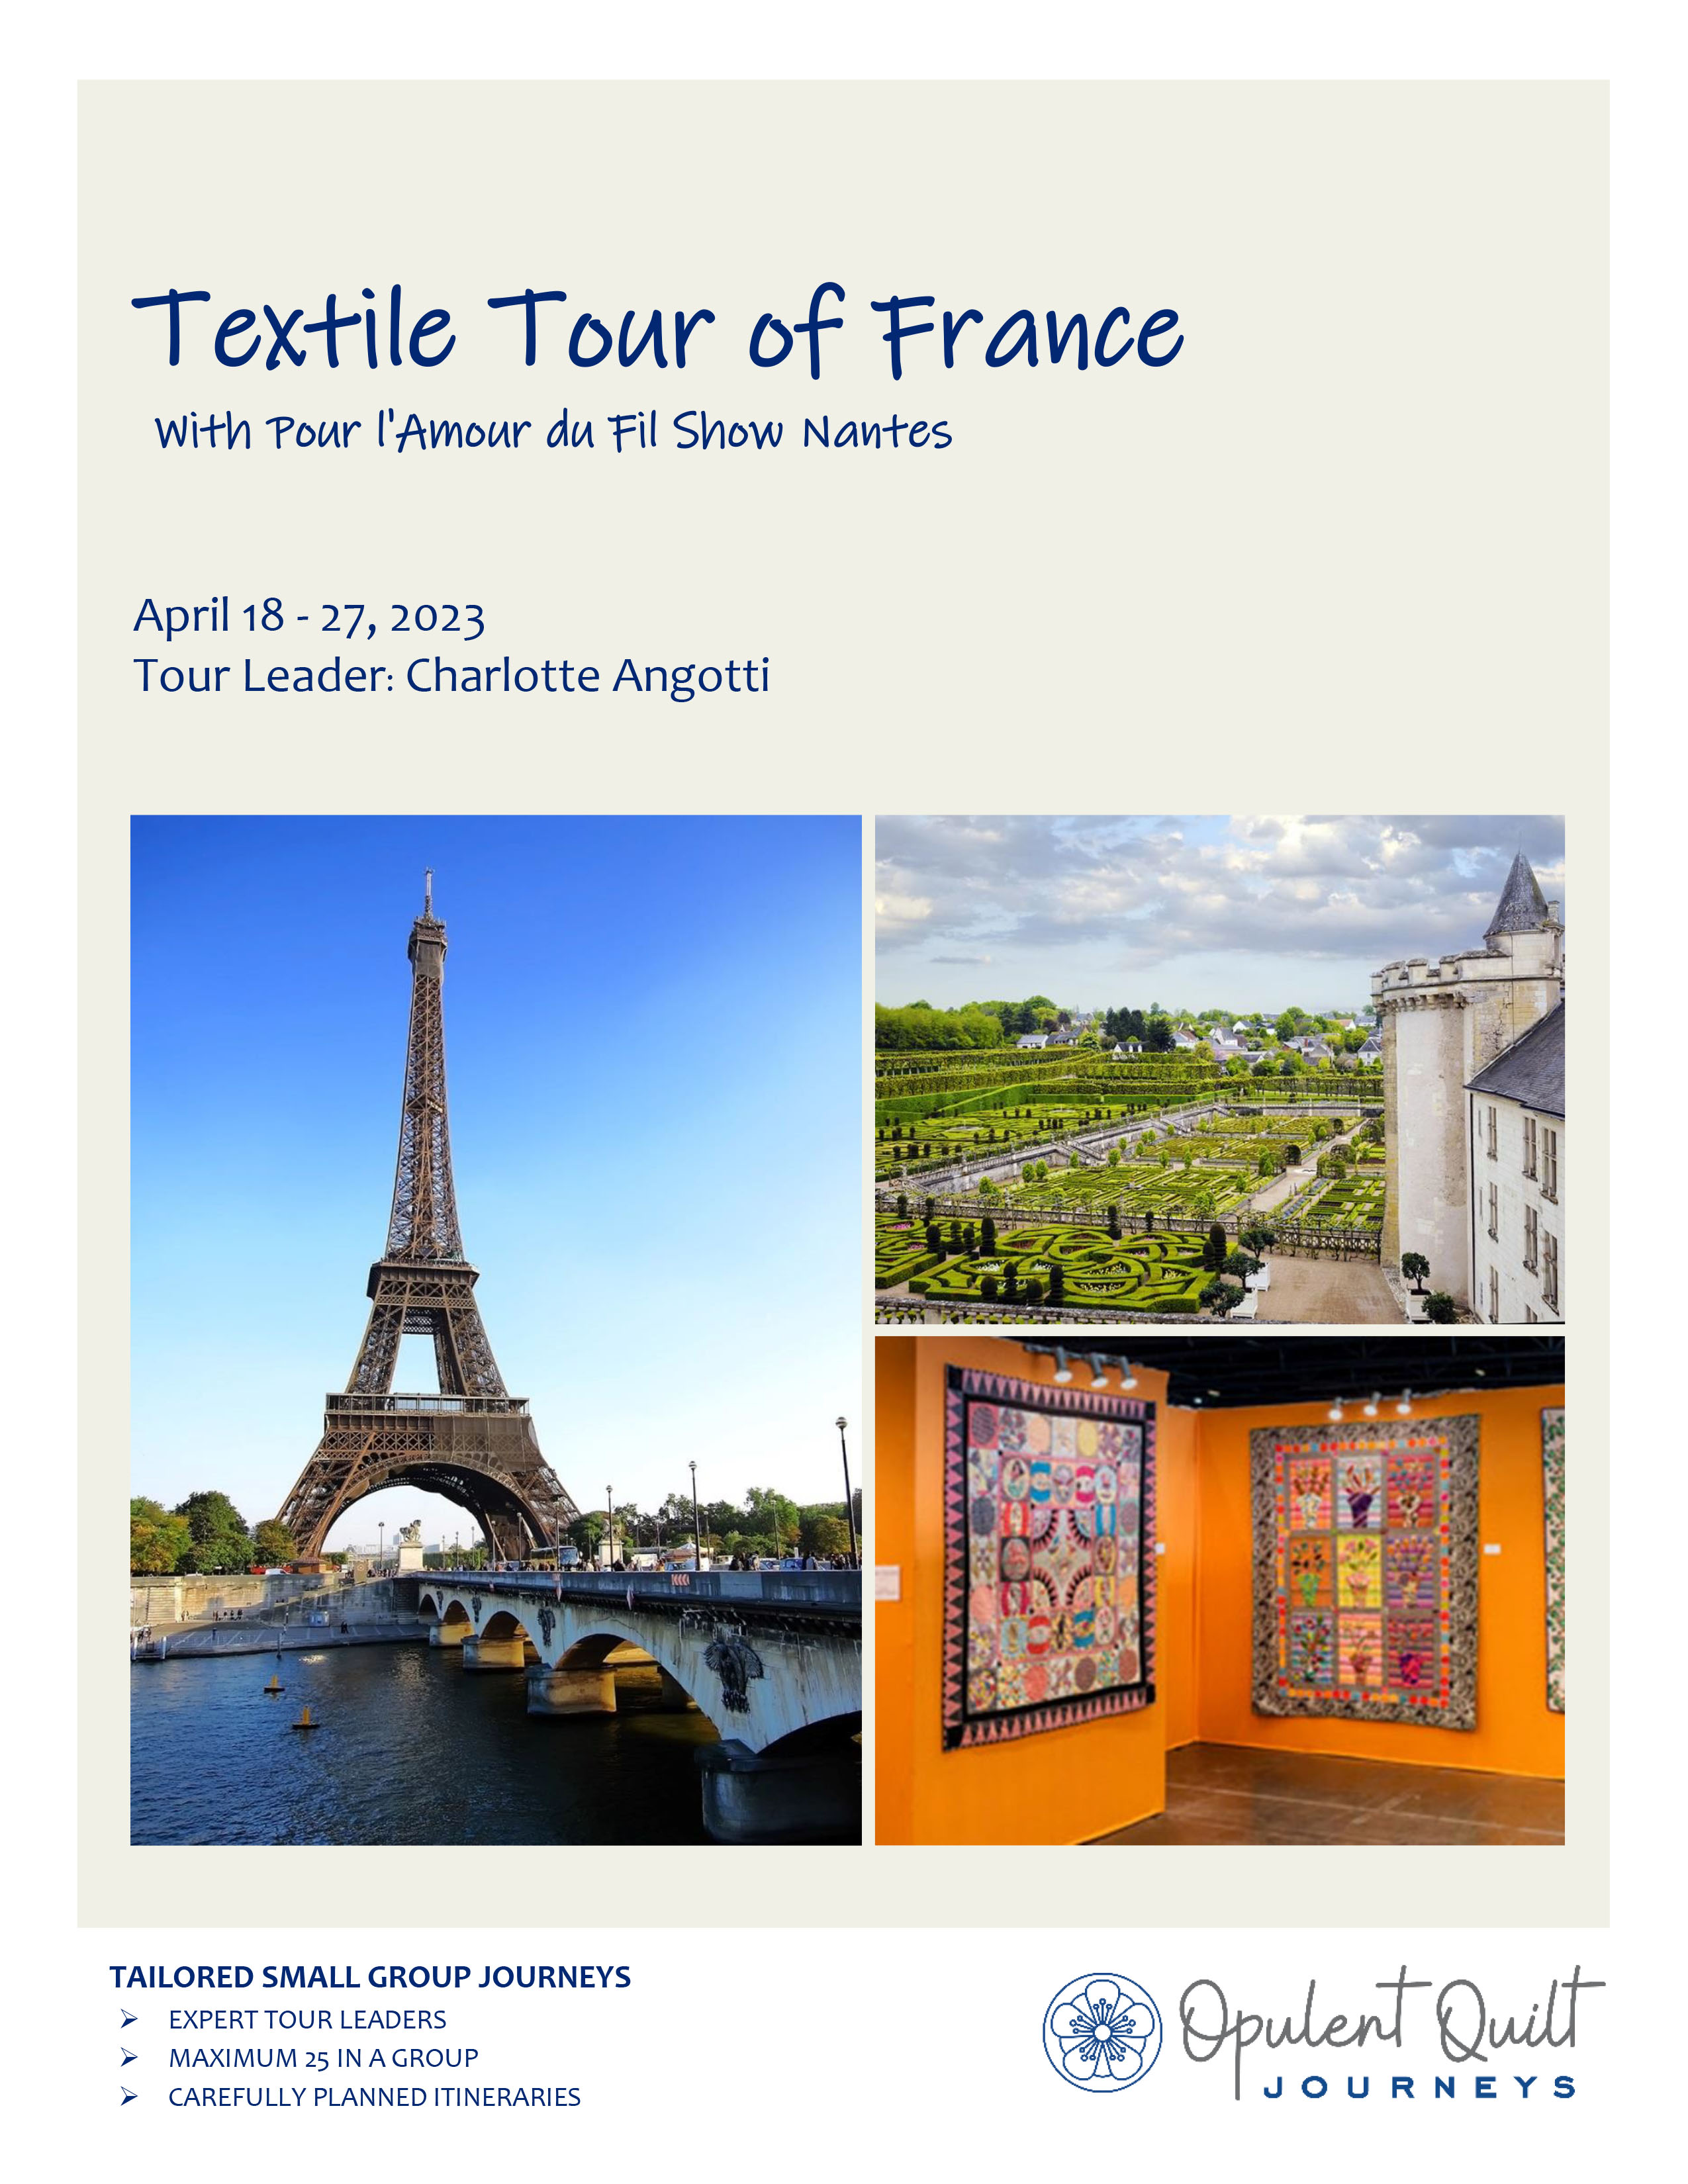 Textile Tour of France with Charlotte Angotti brochure